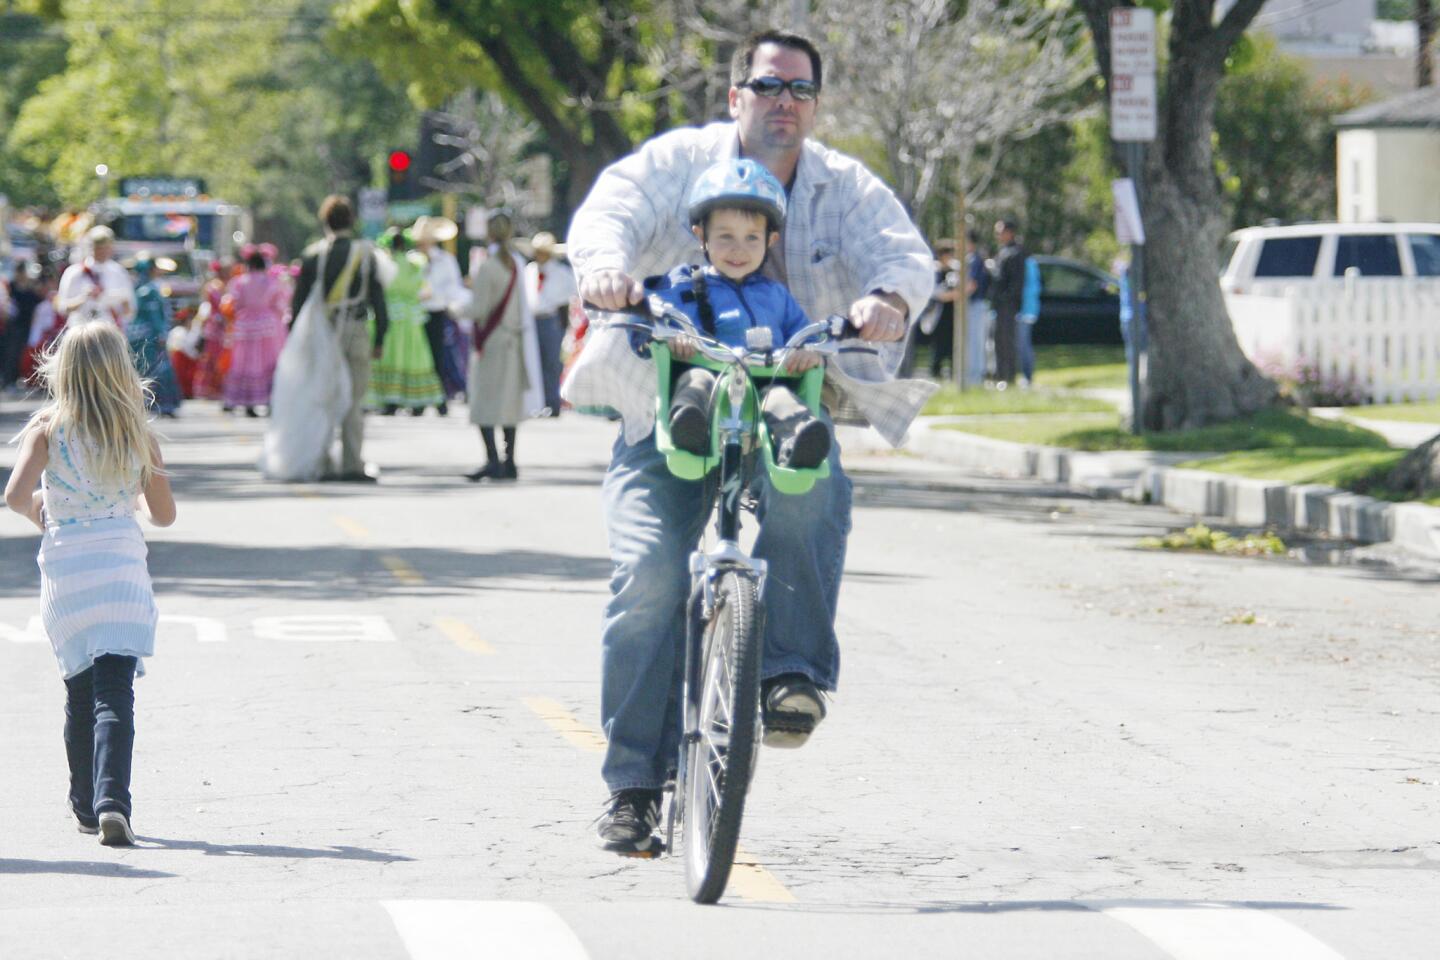 Blake Schroed, top, and his son, Carson, 4, stroll along Keystone St. before watching participants in Burbank on Parade, which took place on Olive Ave. between Keystone St. and Lomita St. on Saturday, April 14, 2012.